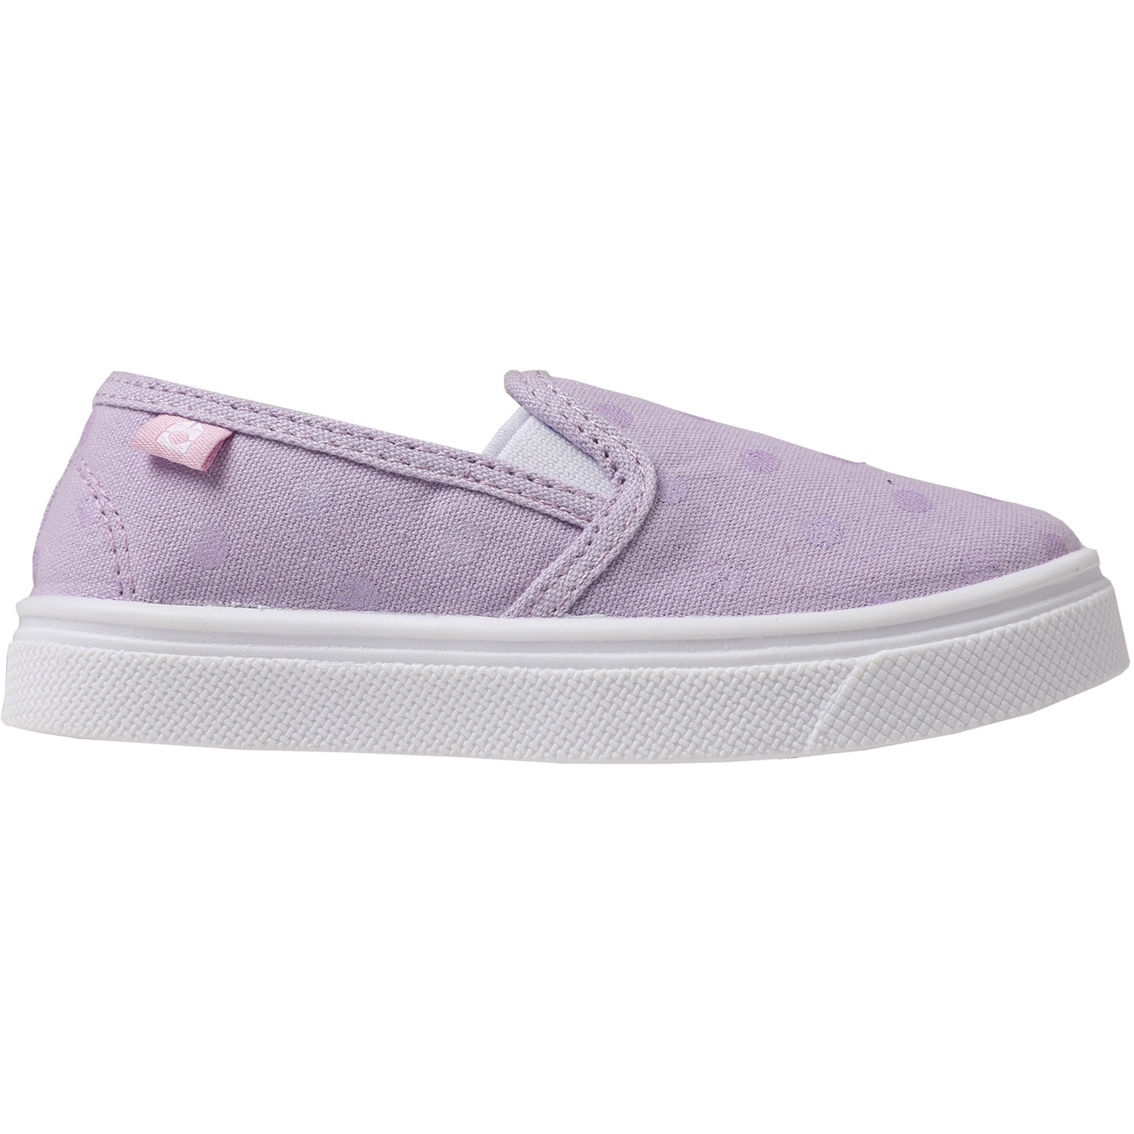 Oomphies Toddler Girls Madison Slip On Shoes - Image 2 of 4